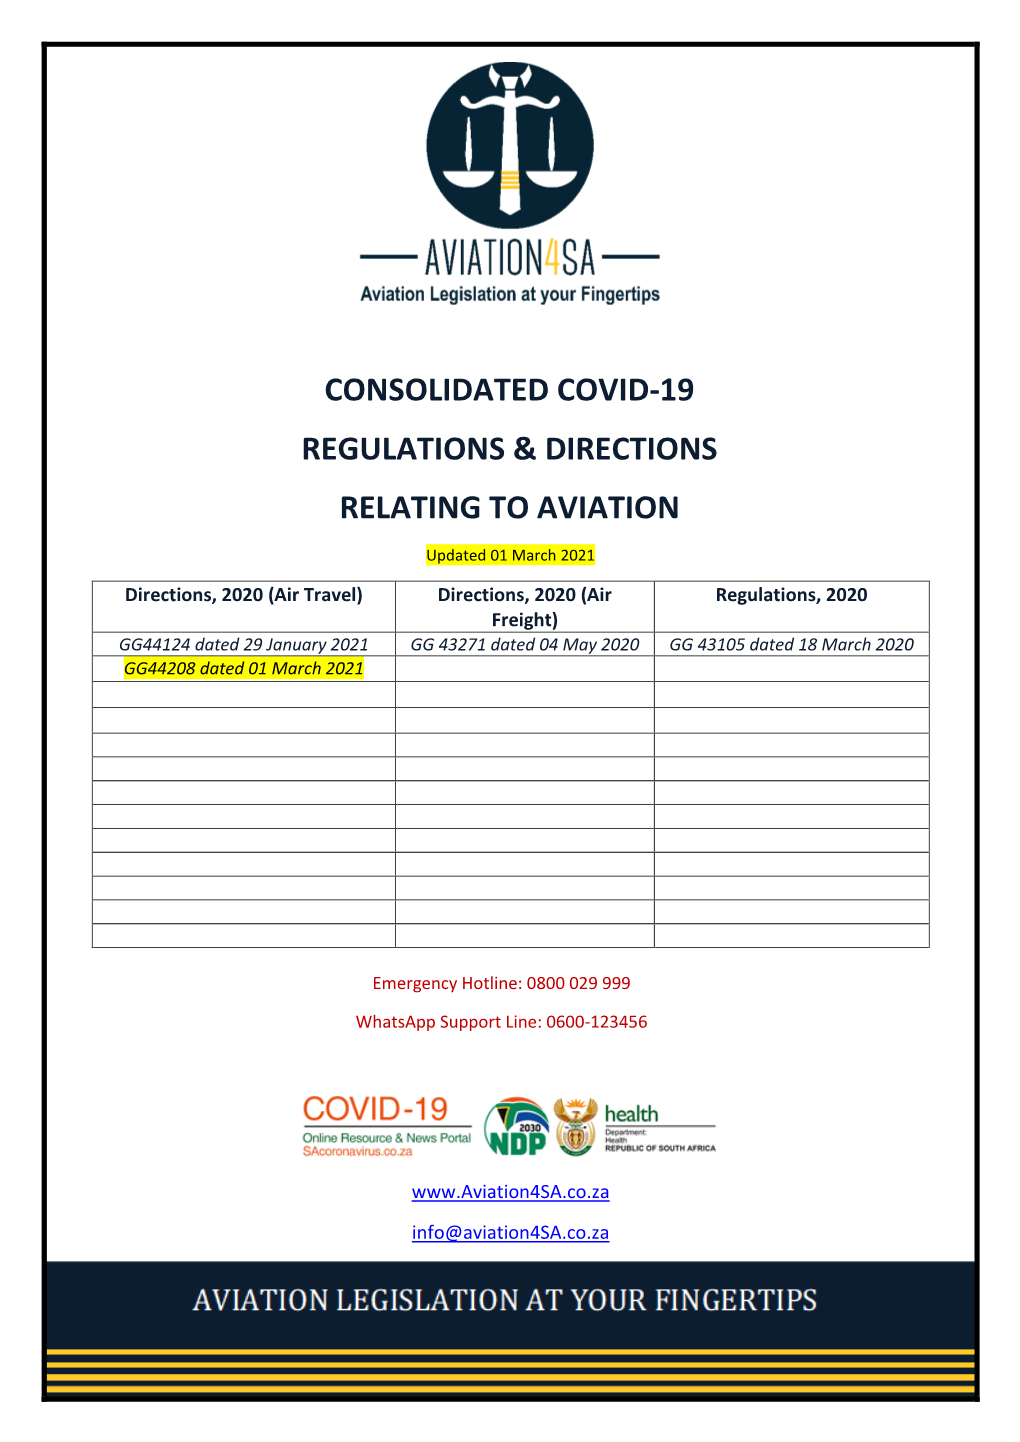 Consolidated Aviation COVID-19 Regulations and Directions